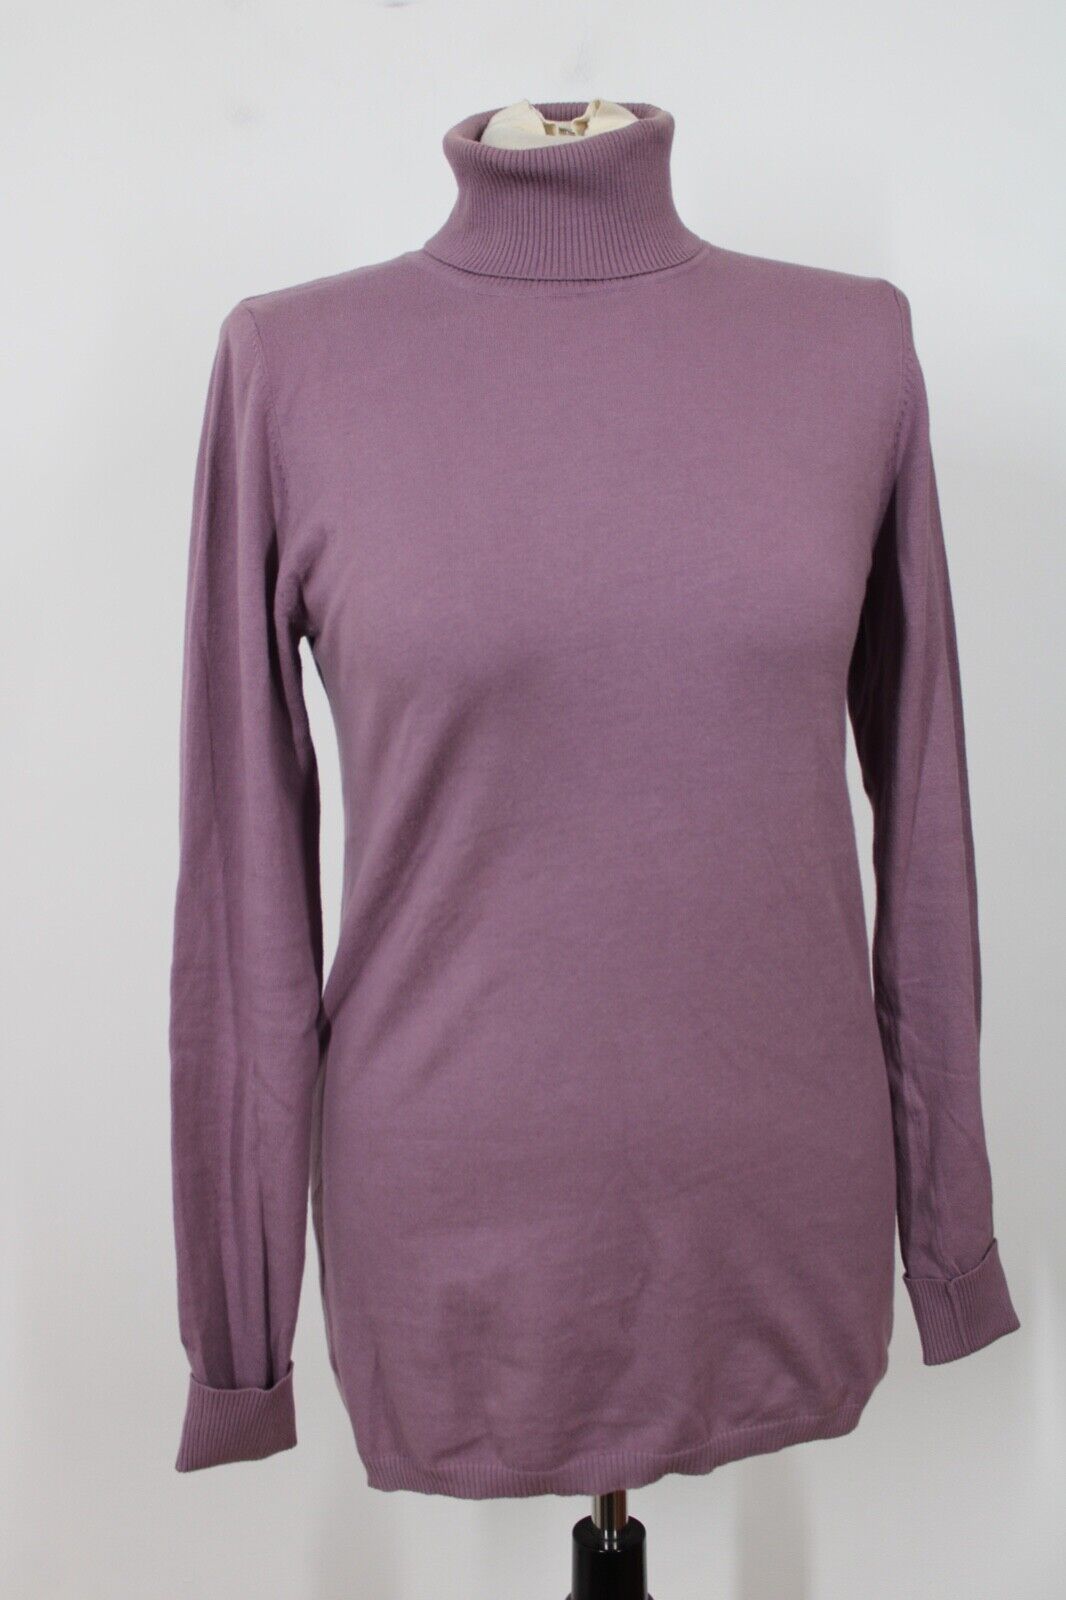 Primary image for United Colors of Benetton M/L? Purple Thin Knit Long Sleeve Turtleneck Sweater